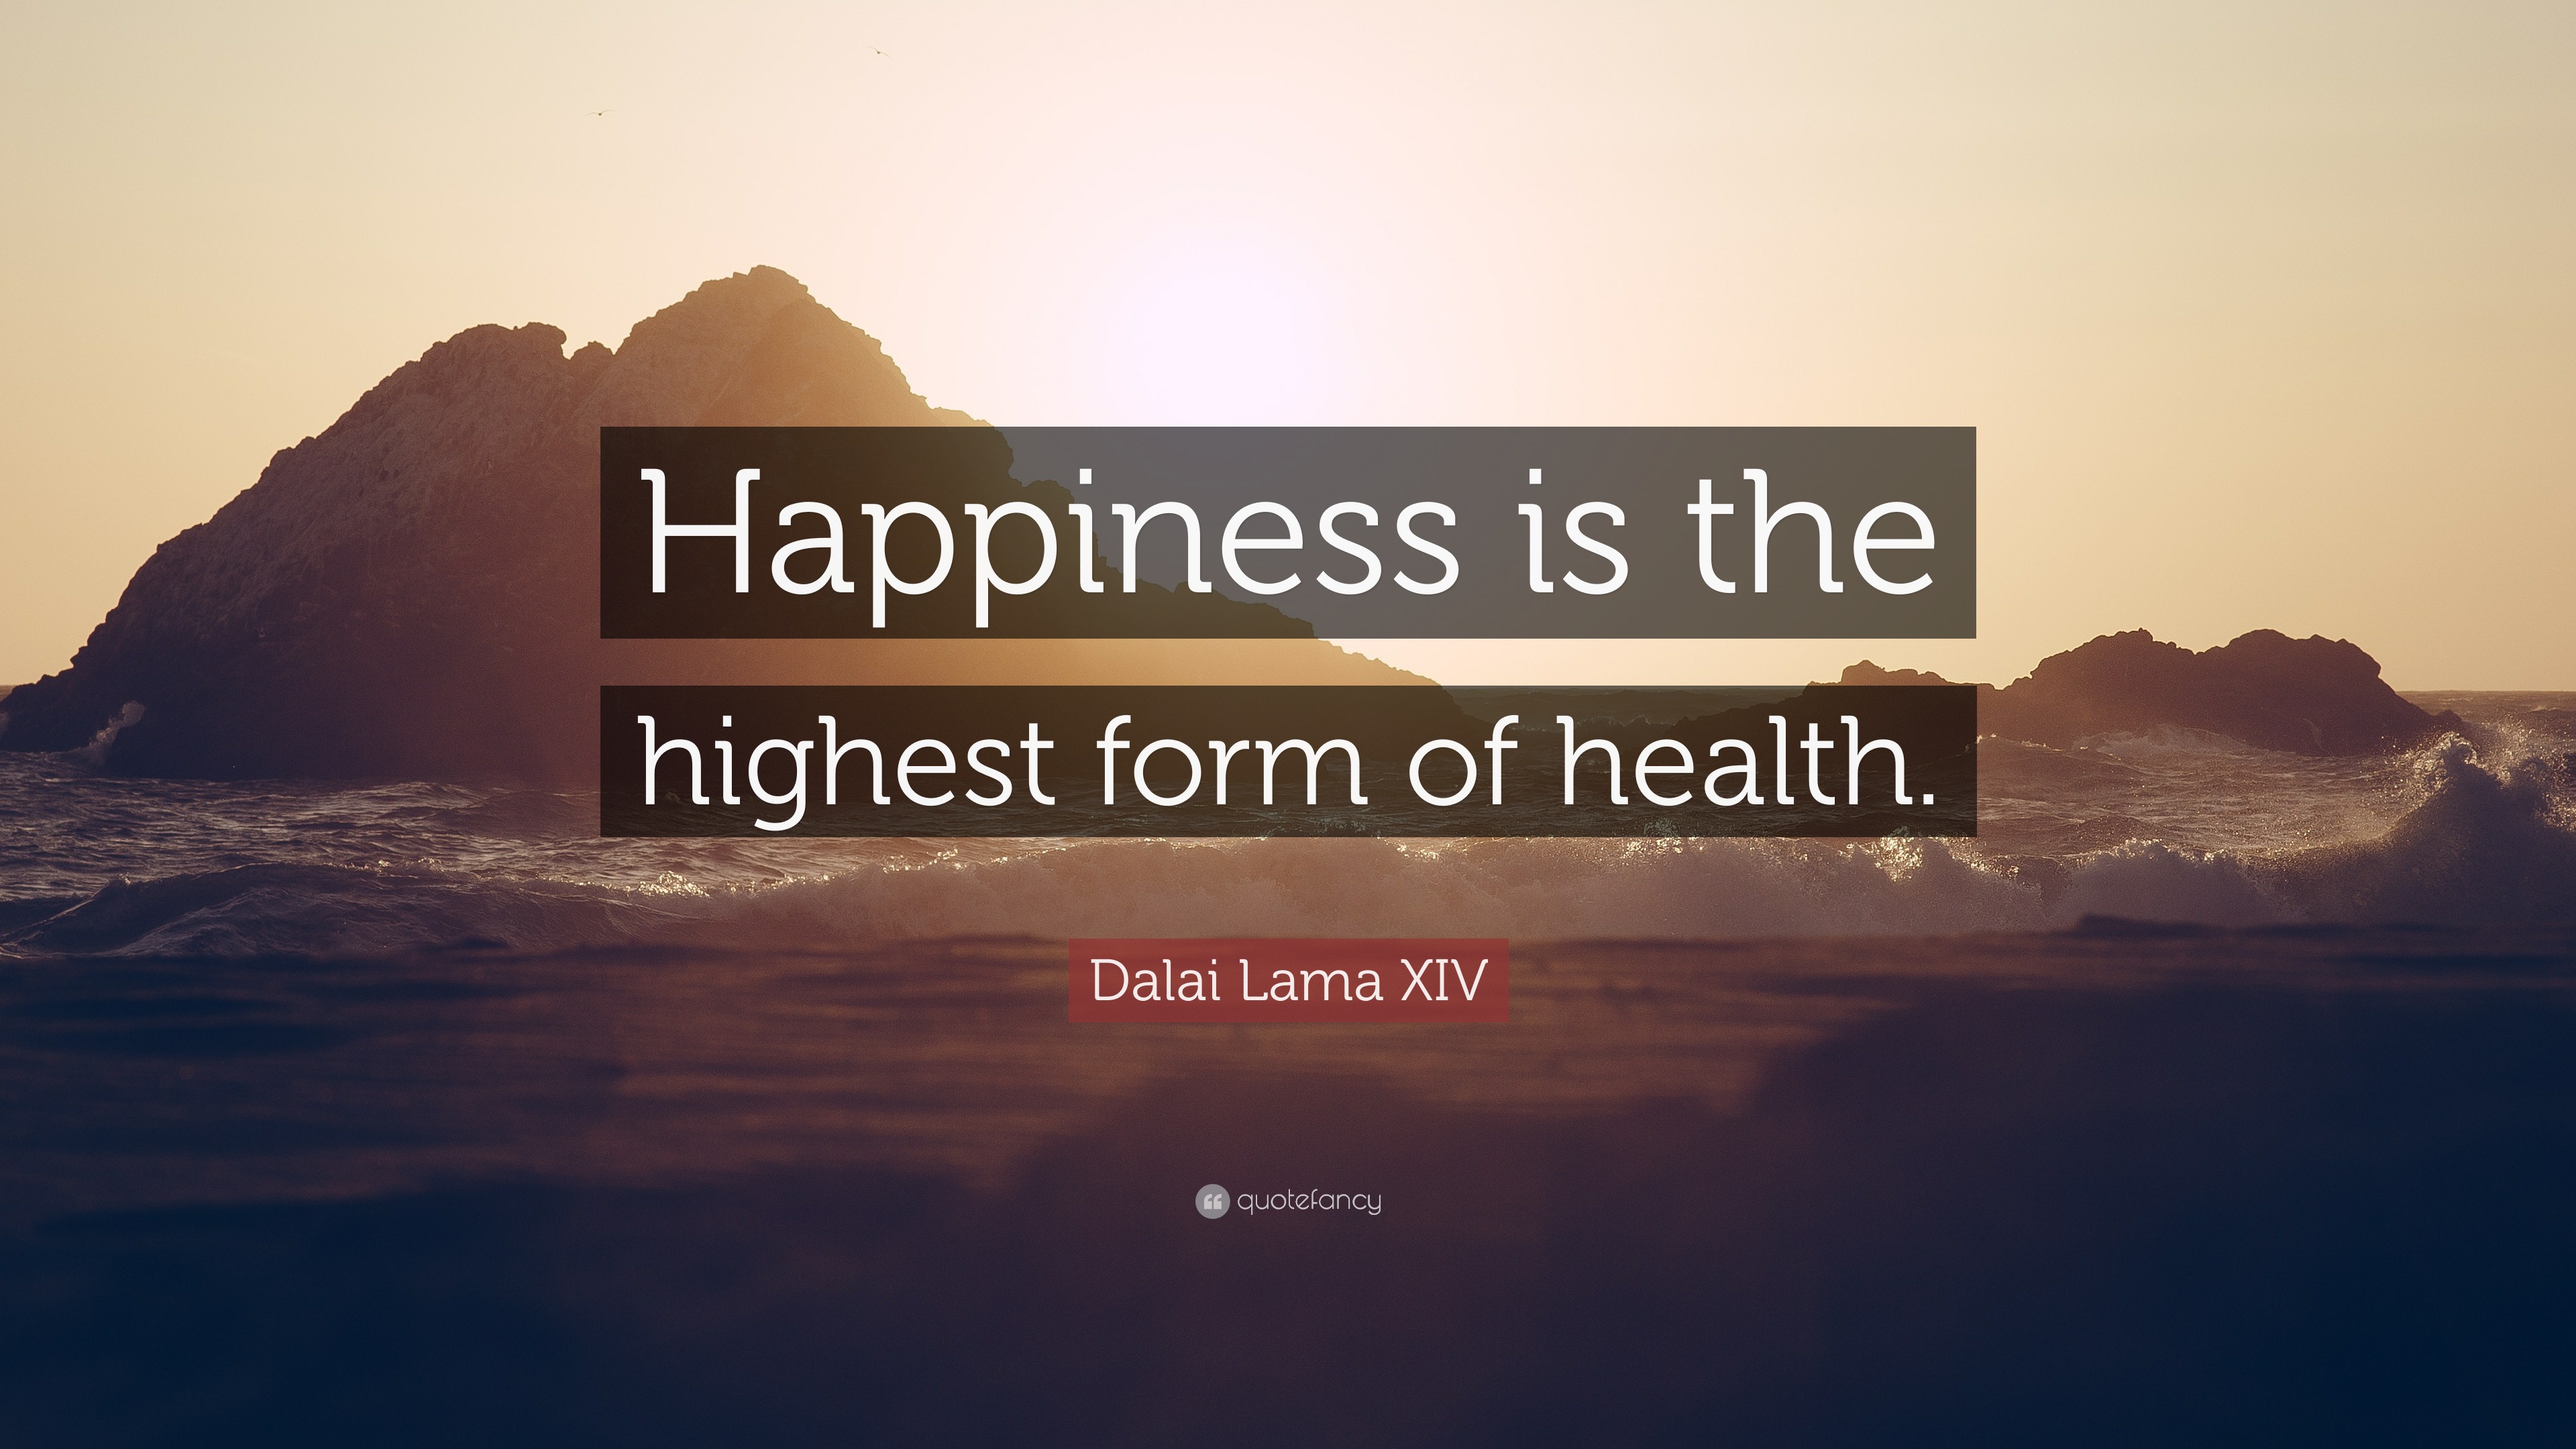 4764150 Dalai Lama XIV Quote Happiness Is The Highest Form Of Health 